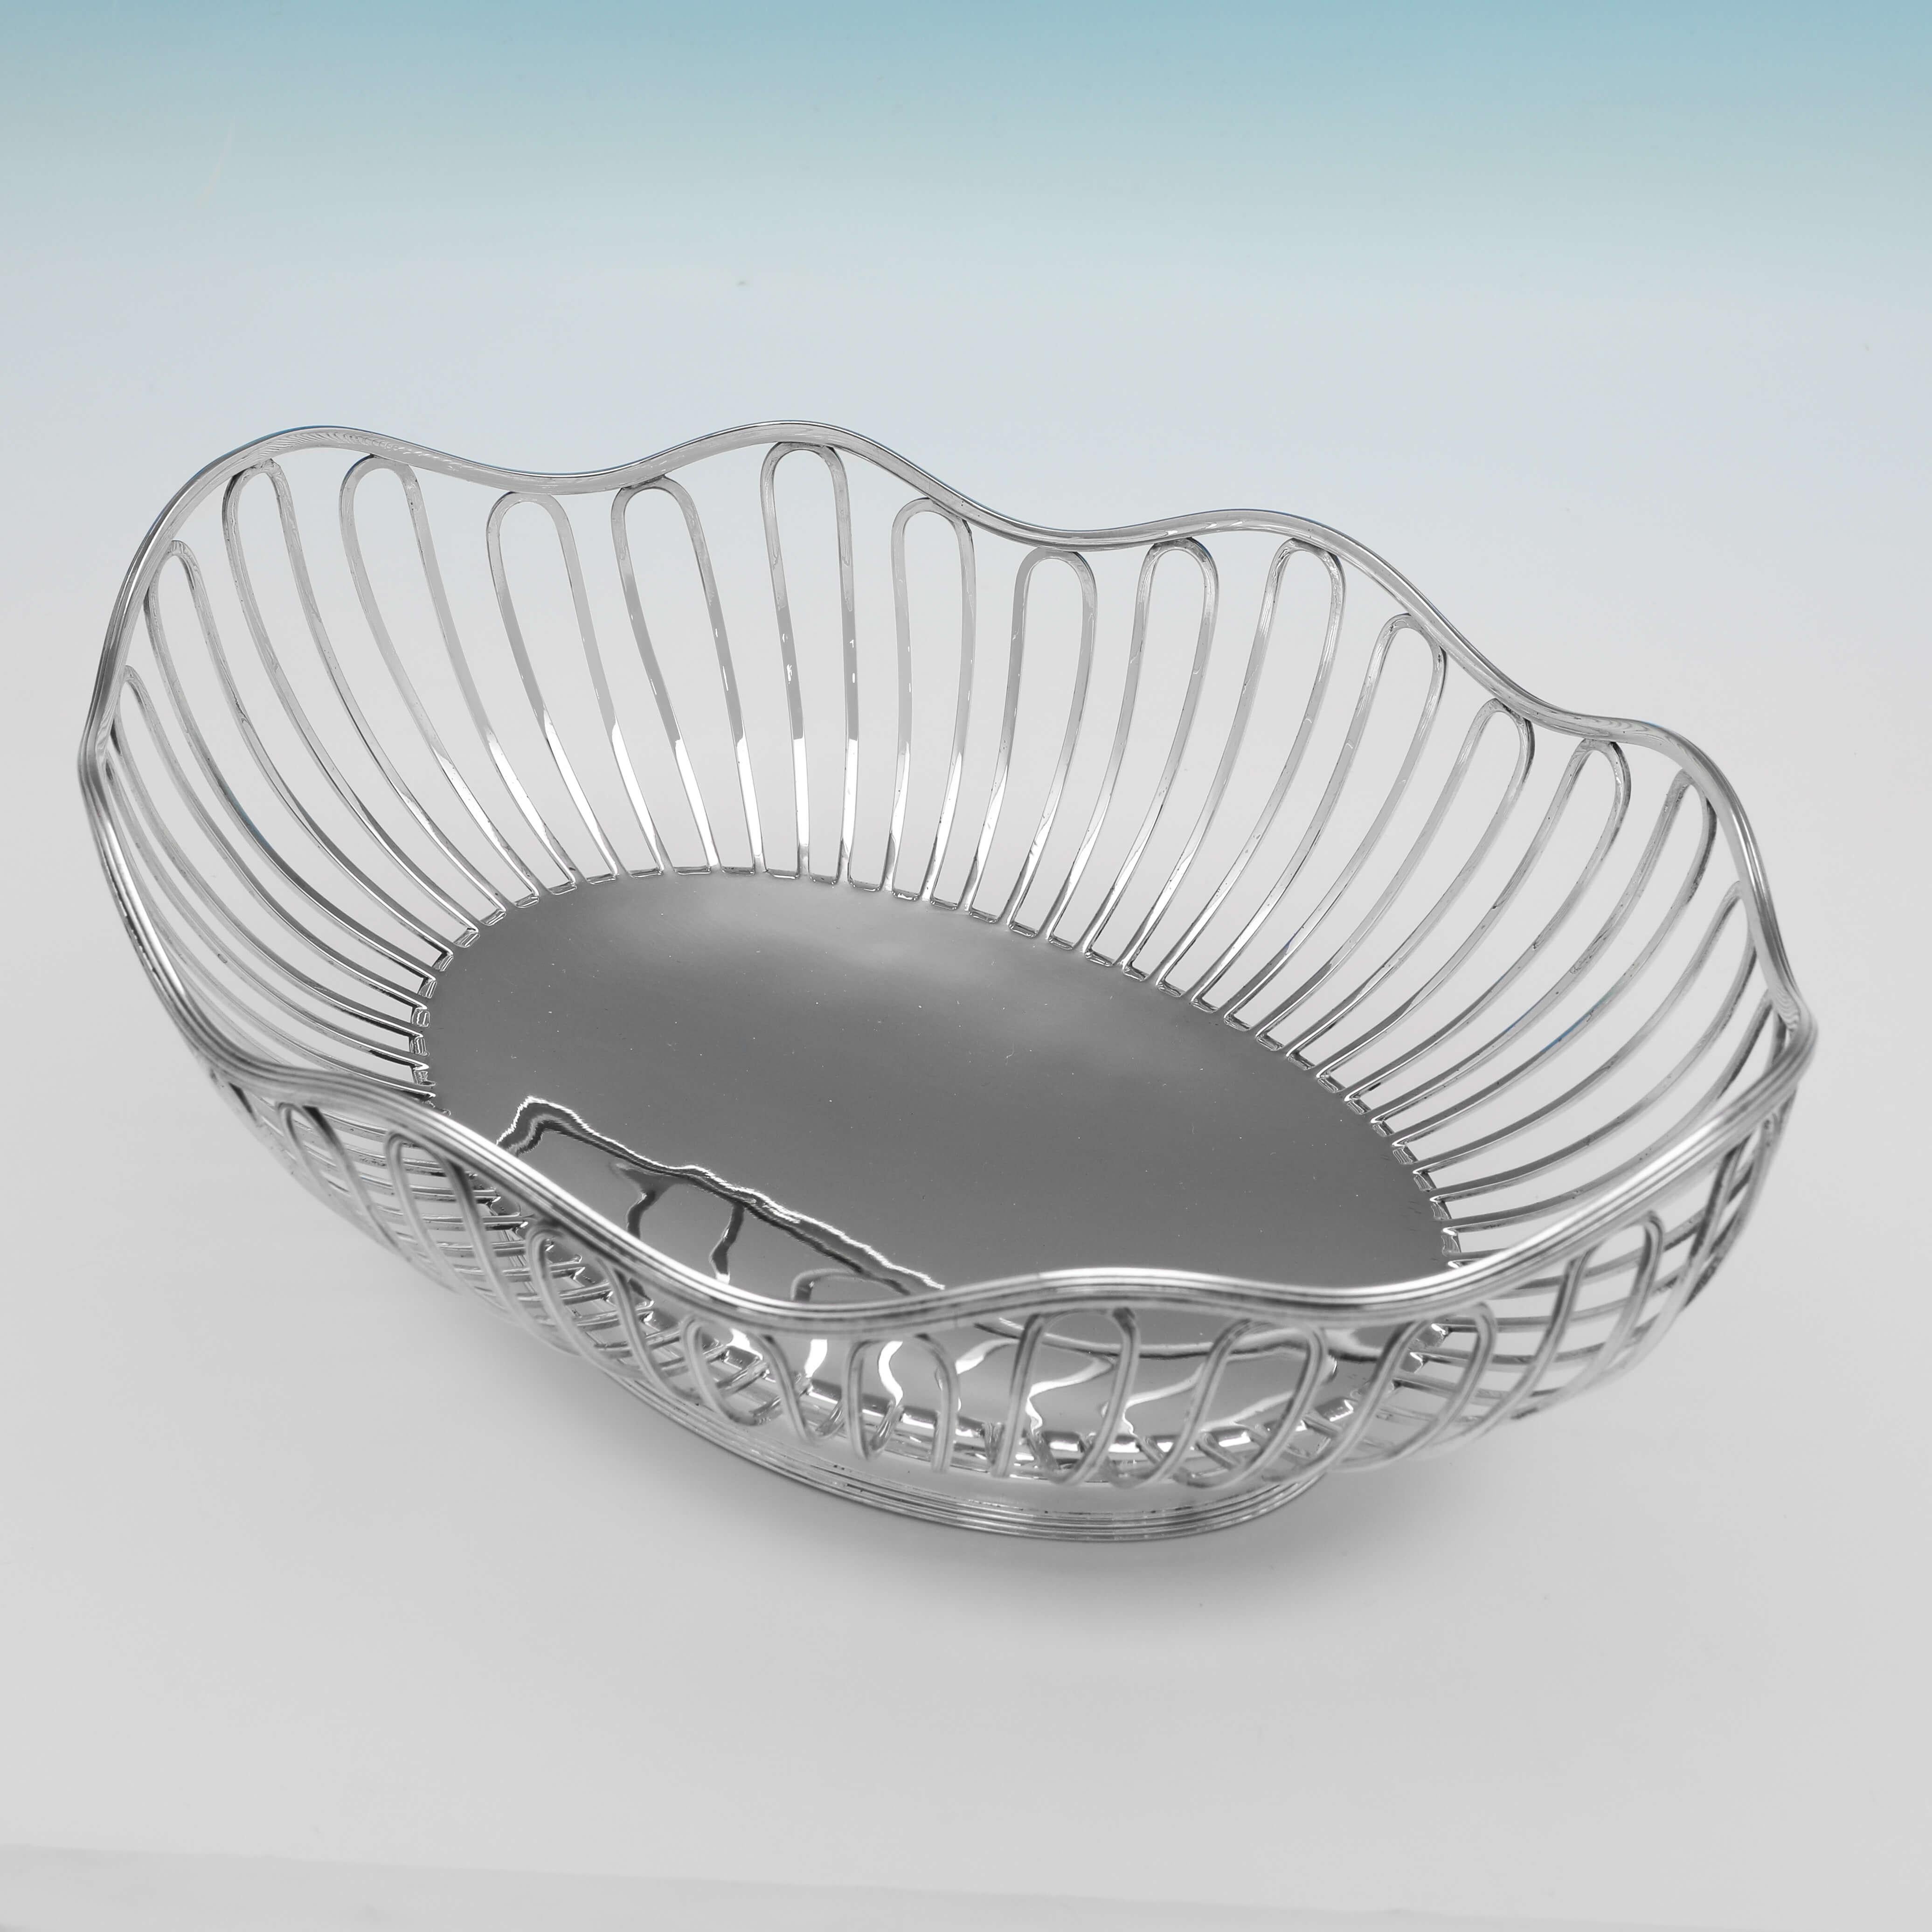 Hallmarked in Sheffield in 1914 by Walker & Hall, this stylish Antique Sterling Silver Dish would make a very attractive bread dish for the table, featuring wirework sides, and a shaped border. 

The dish measures 4